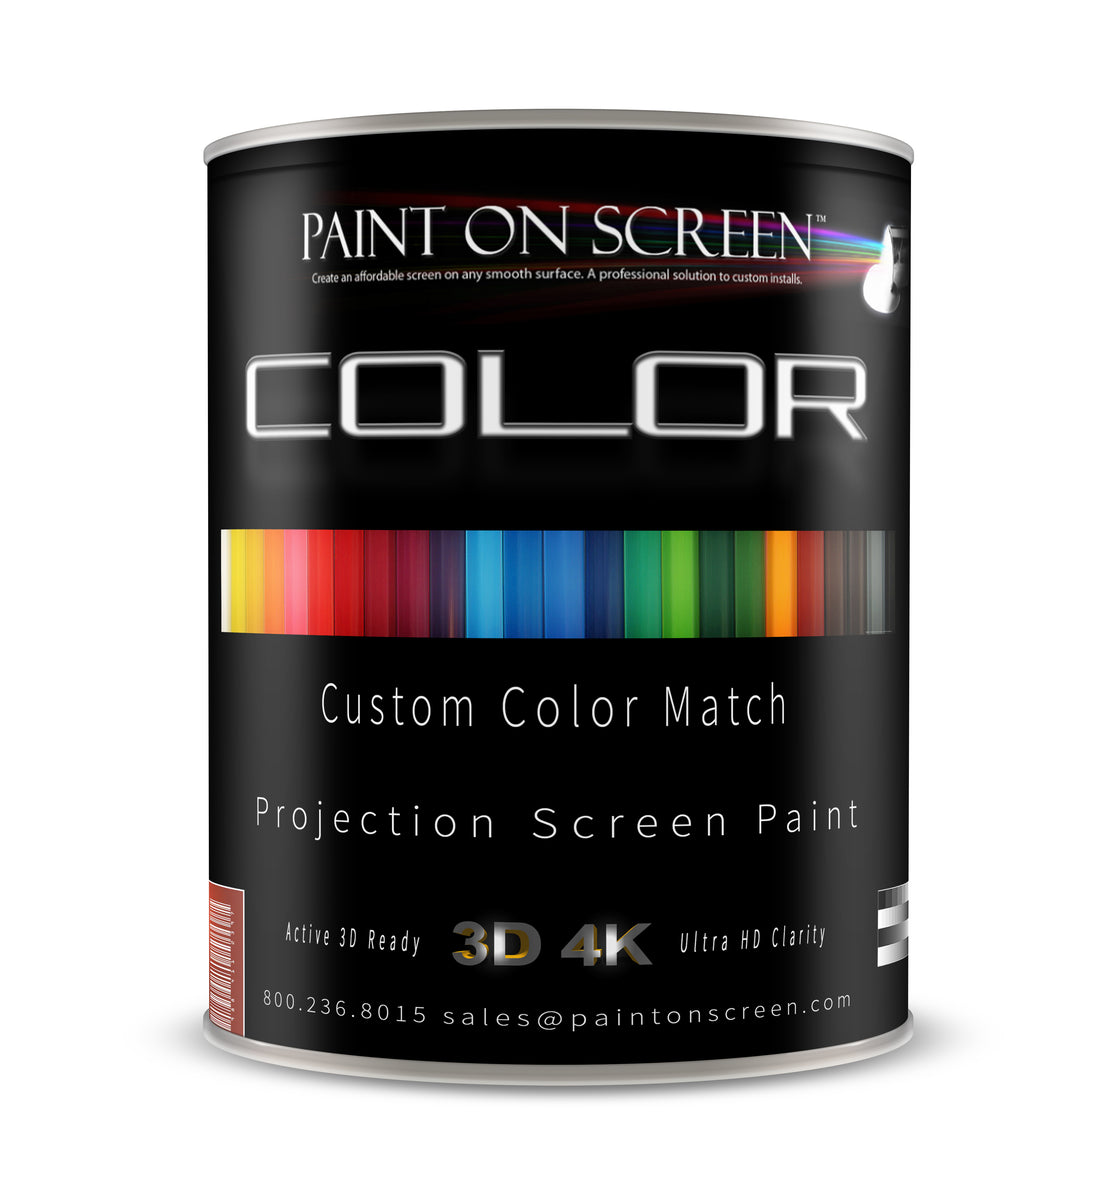 COLOR Match Paint On Screen